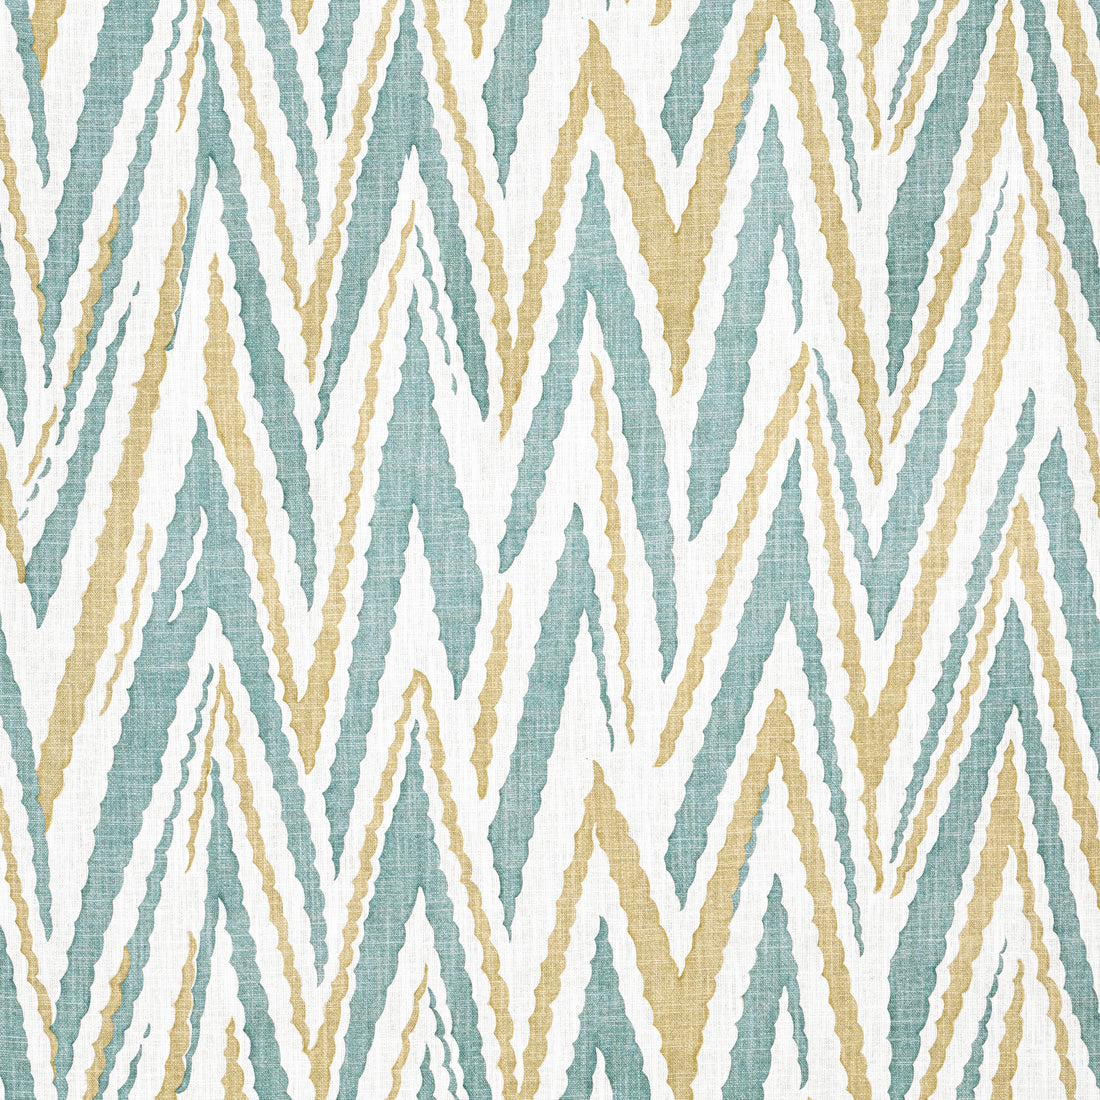 Highland Peak fabric in turquoise color - pattern number AF23141 - by Anna French in the Willow Tree collection